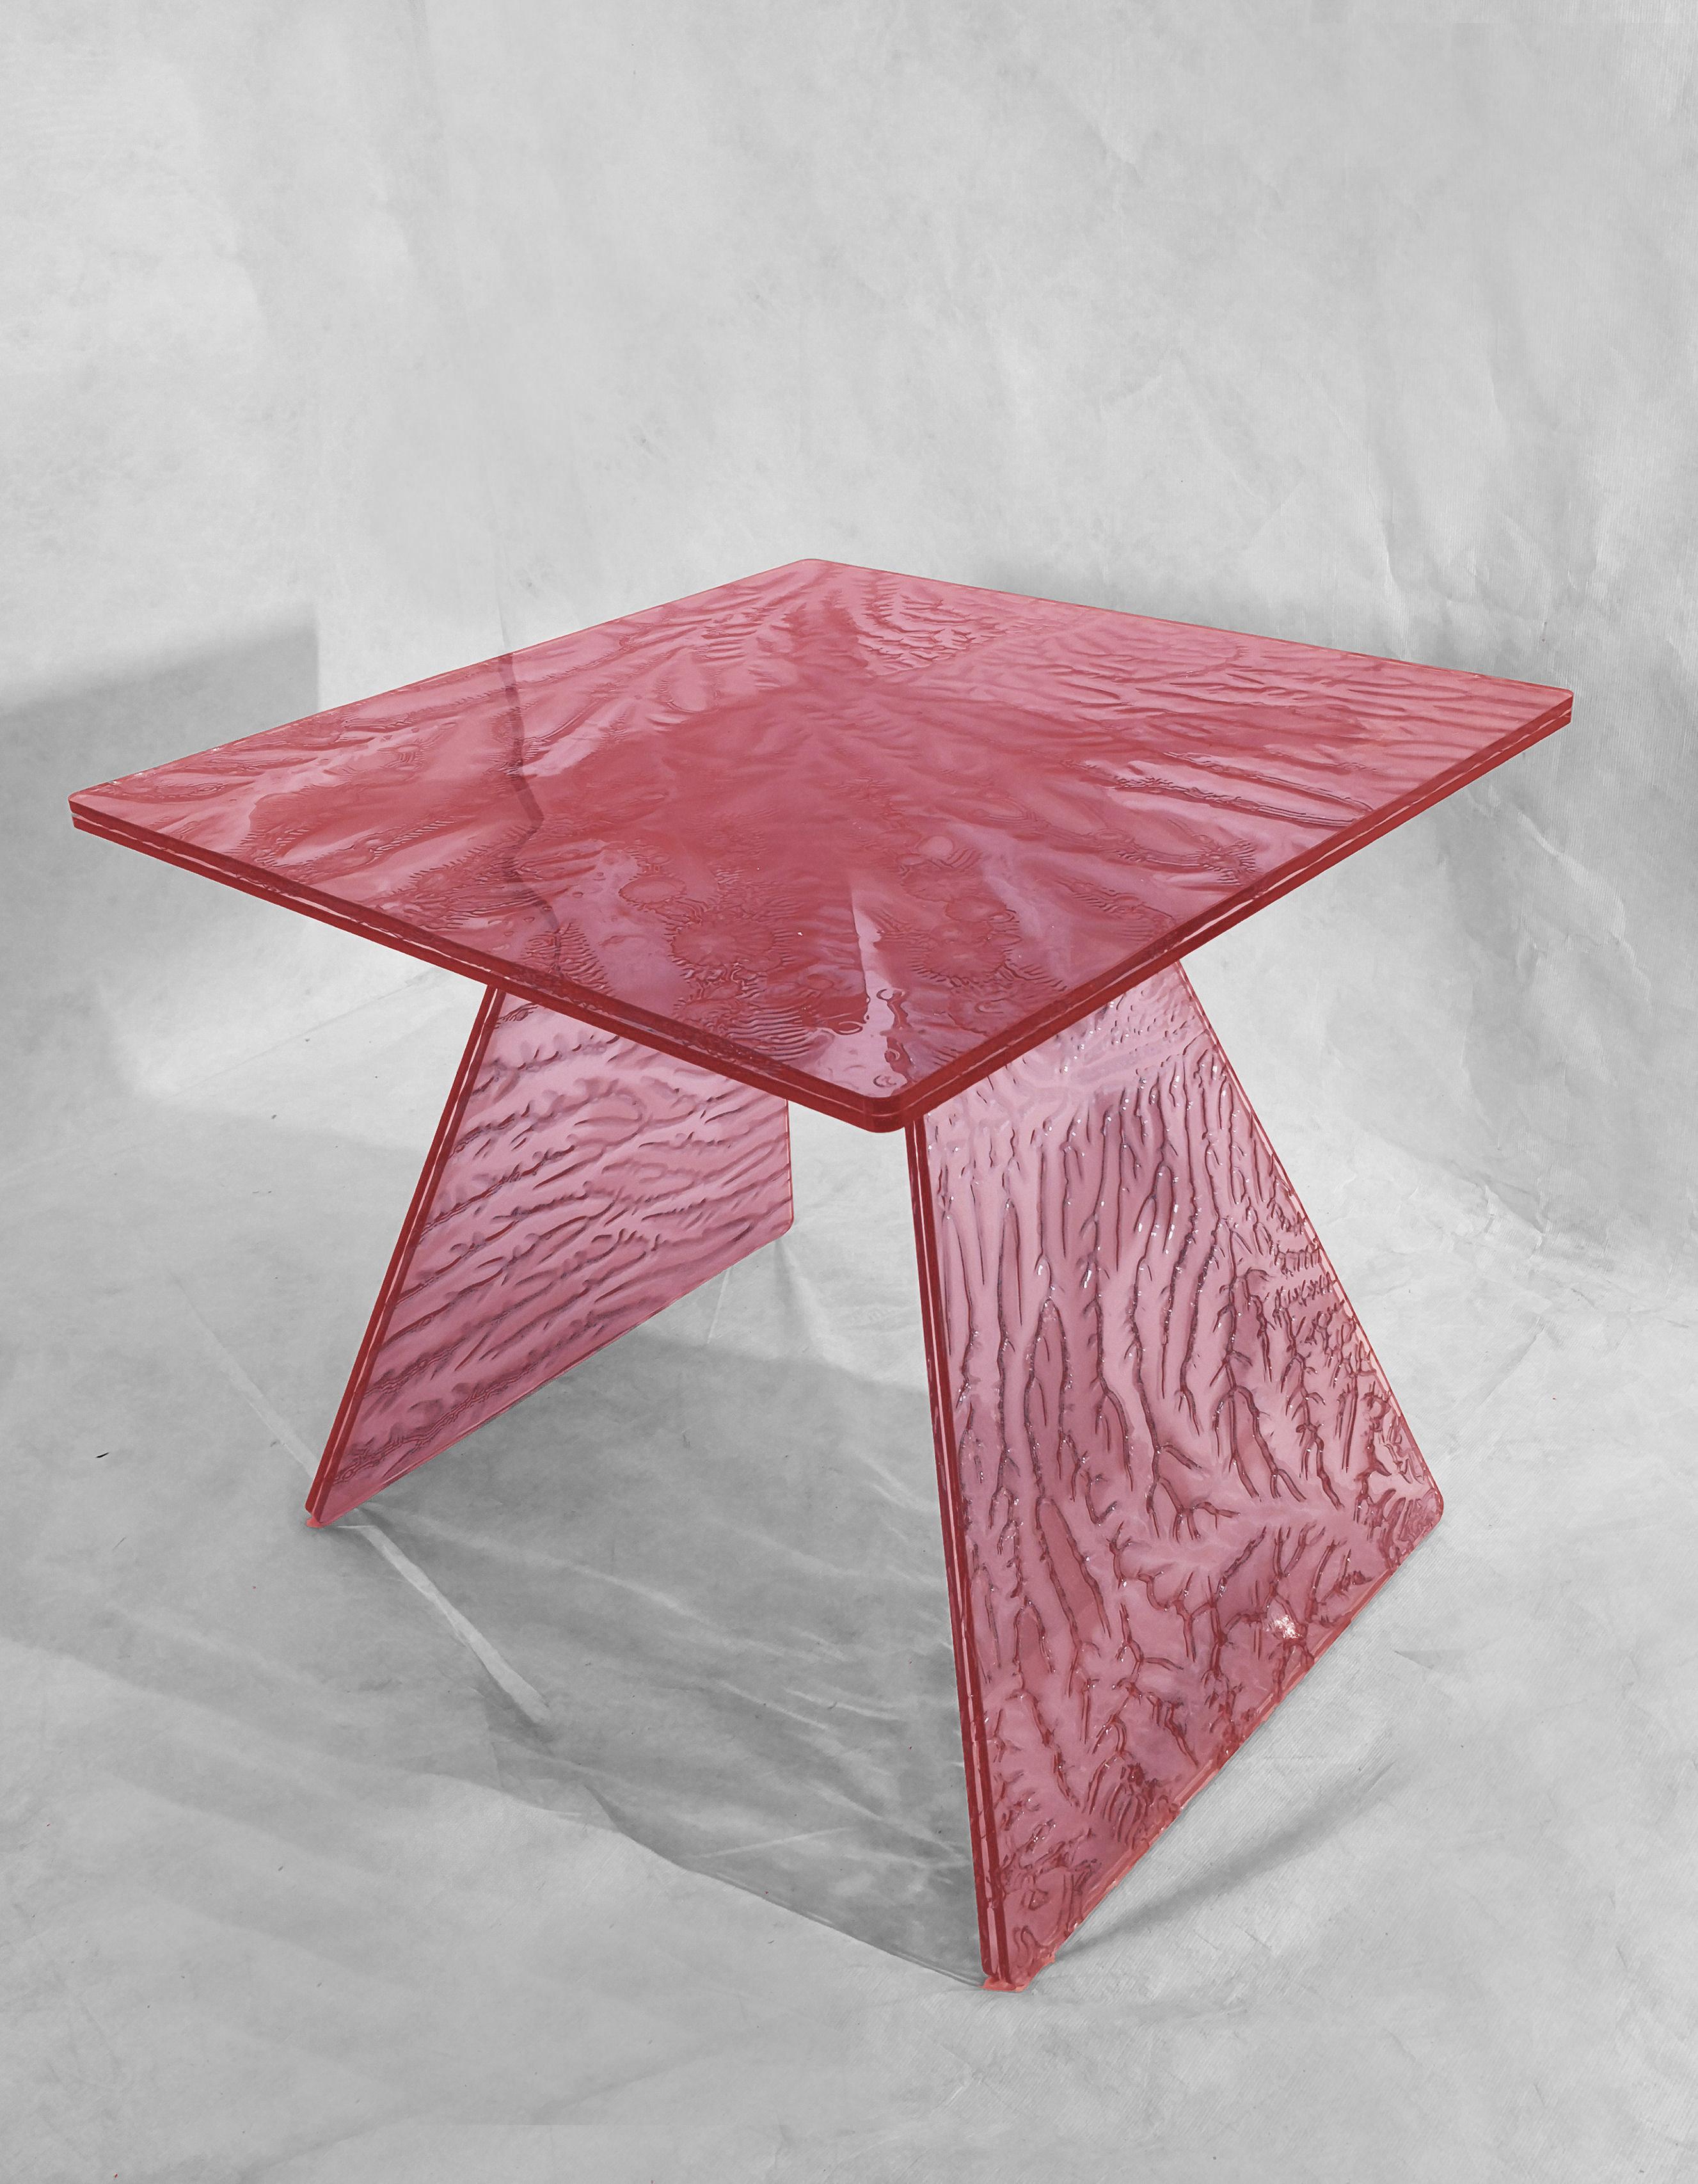 Coffee table, handmade in transparent acrylic colored with an innovative technology.
The material is made through the fusion of three plates, one of which
Partially cured center.
This process creates unique and particular effects,